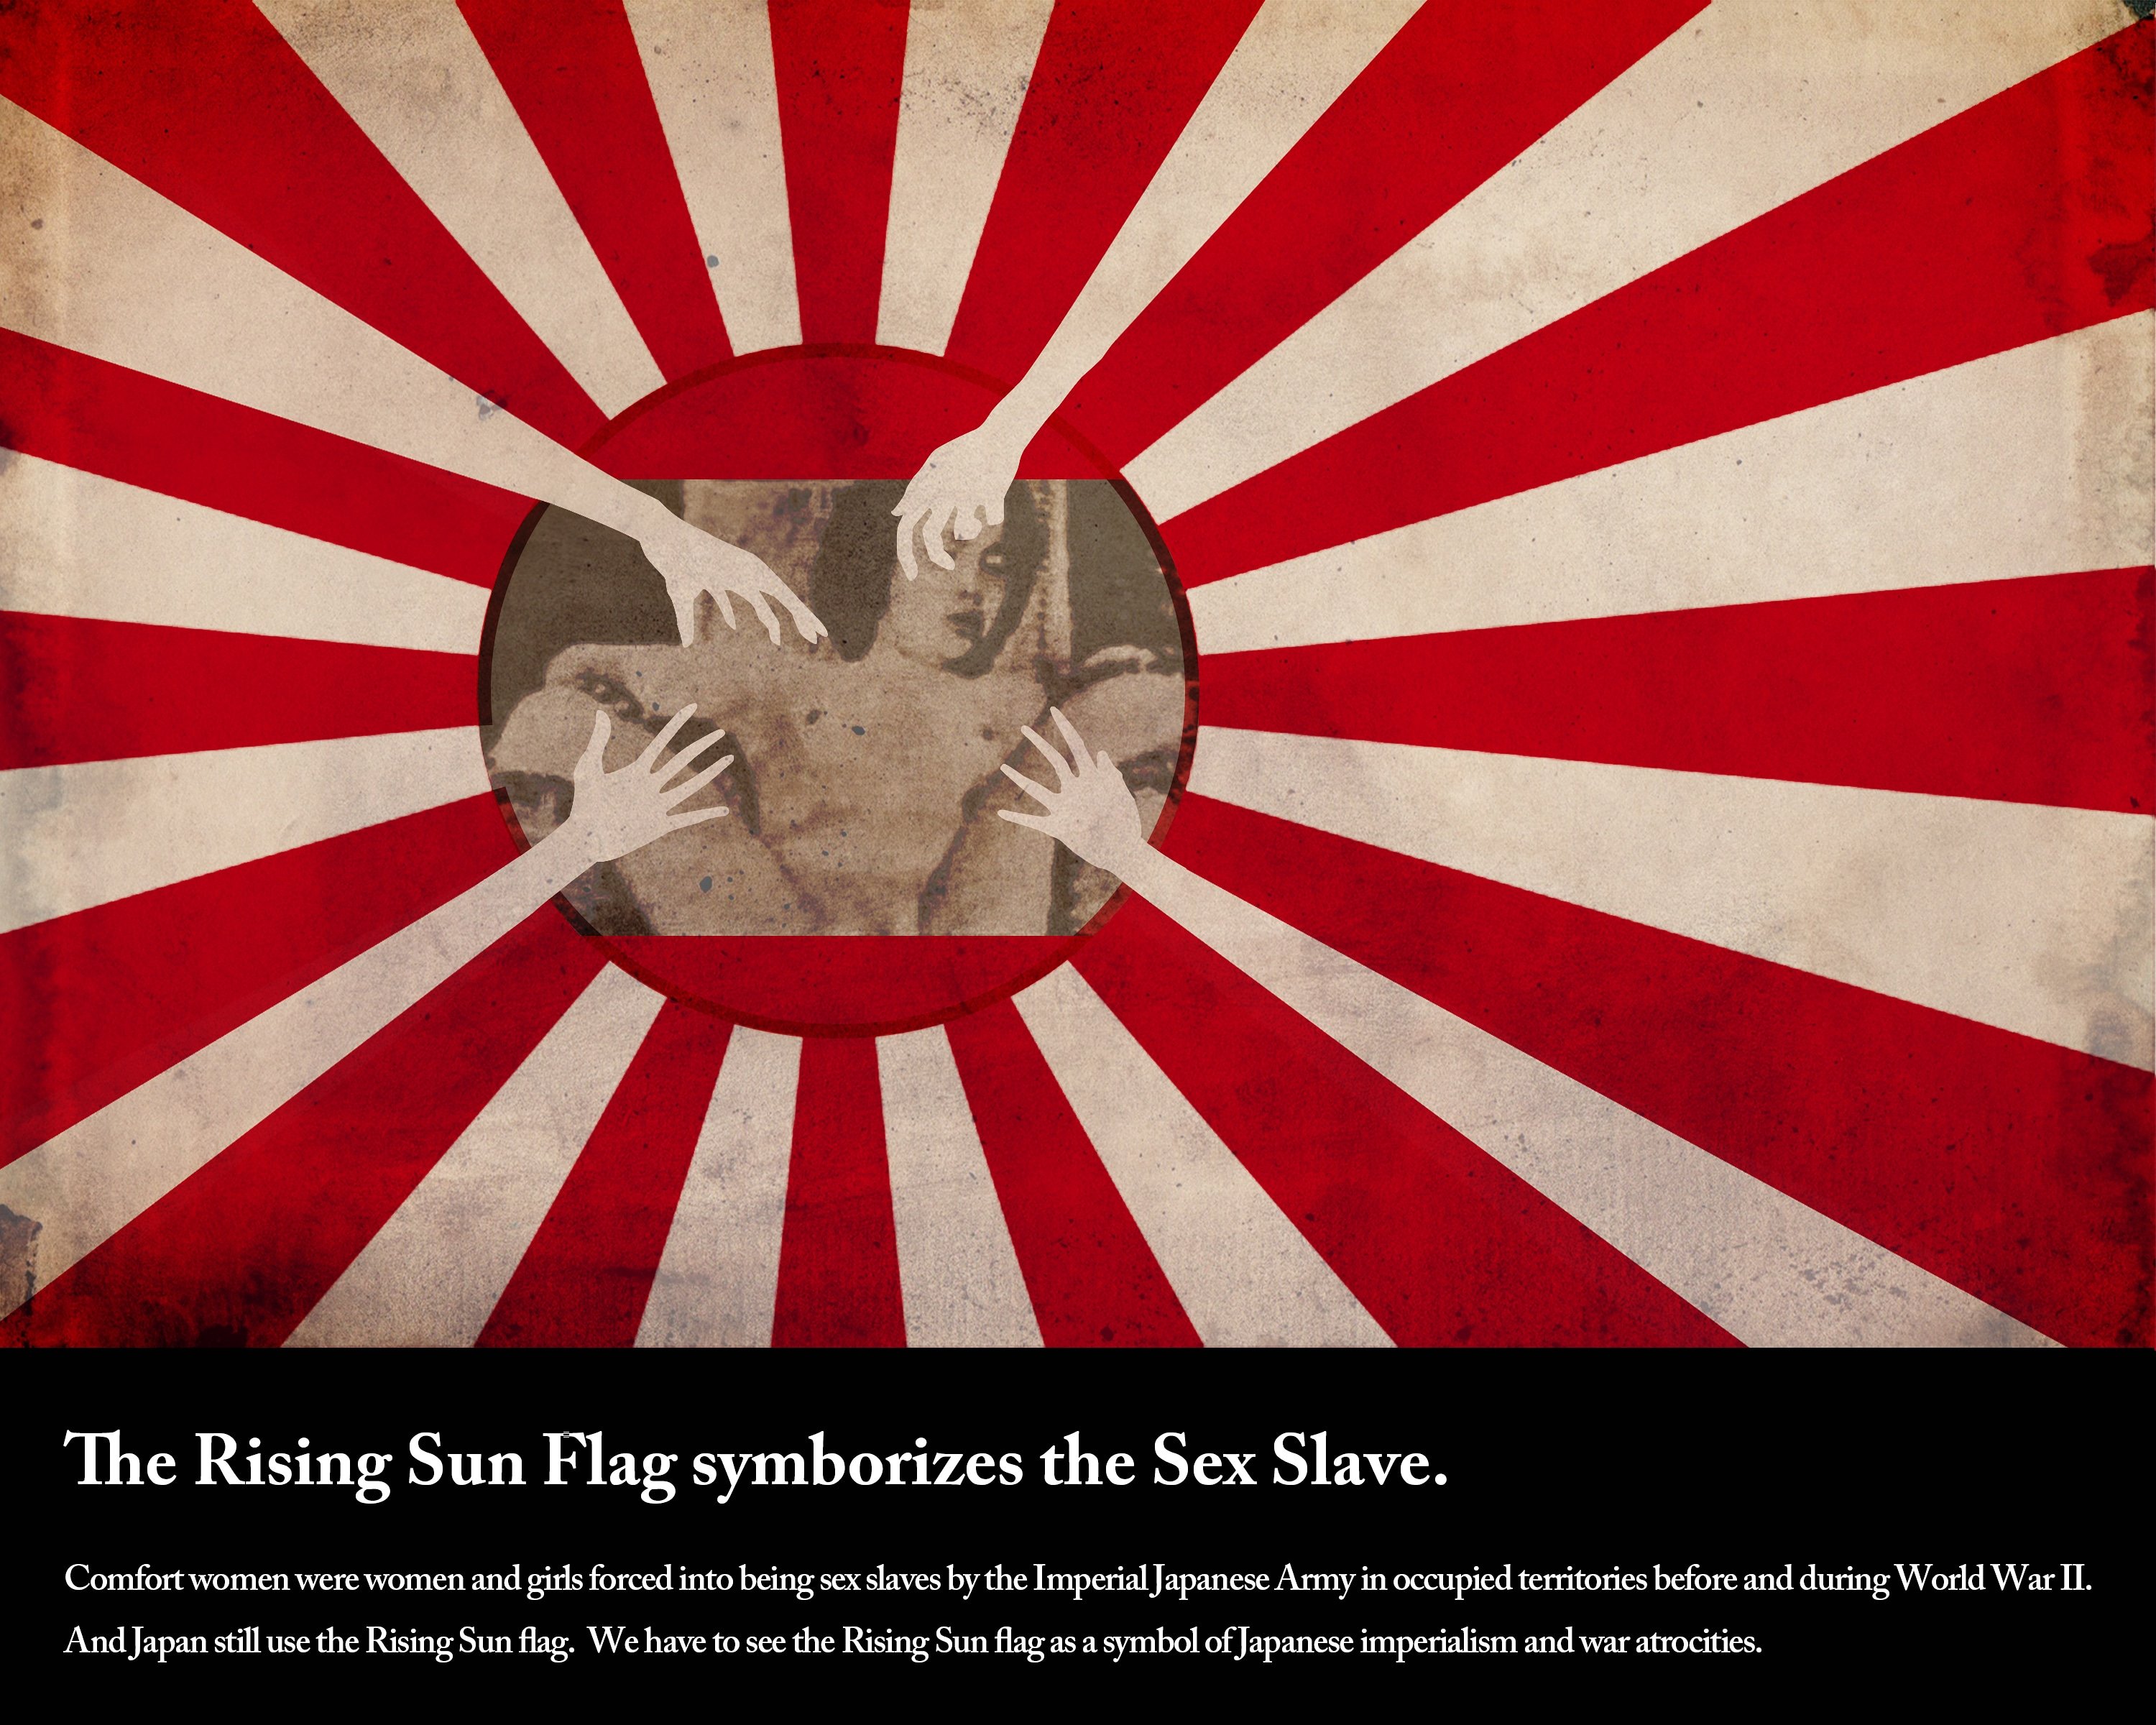 yok on Twitter: "People use 'rising sun flag' on behalf of the Japanese flag simply because it is cool. But now everyone needs to know about the historical pain and #Liverpool #